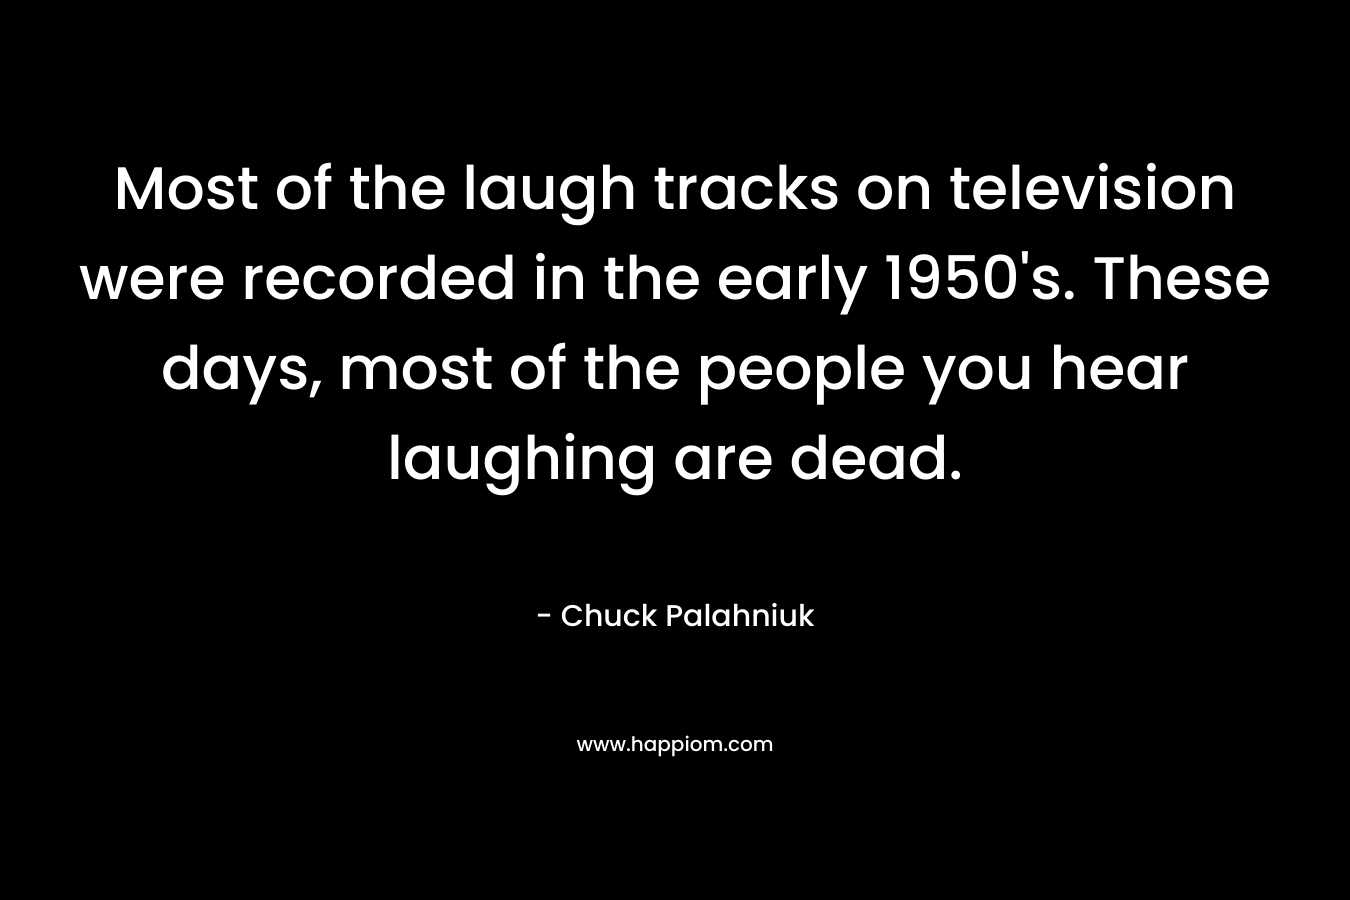 Most of the laugh tracks on television were recorded in the early 1950’s. These days, most of the people you hear laughing are dead. – Chuck Palahniuk